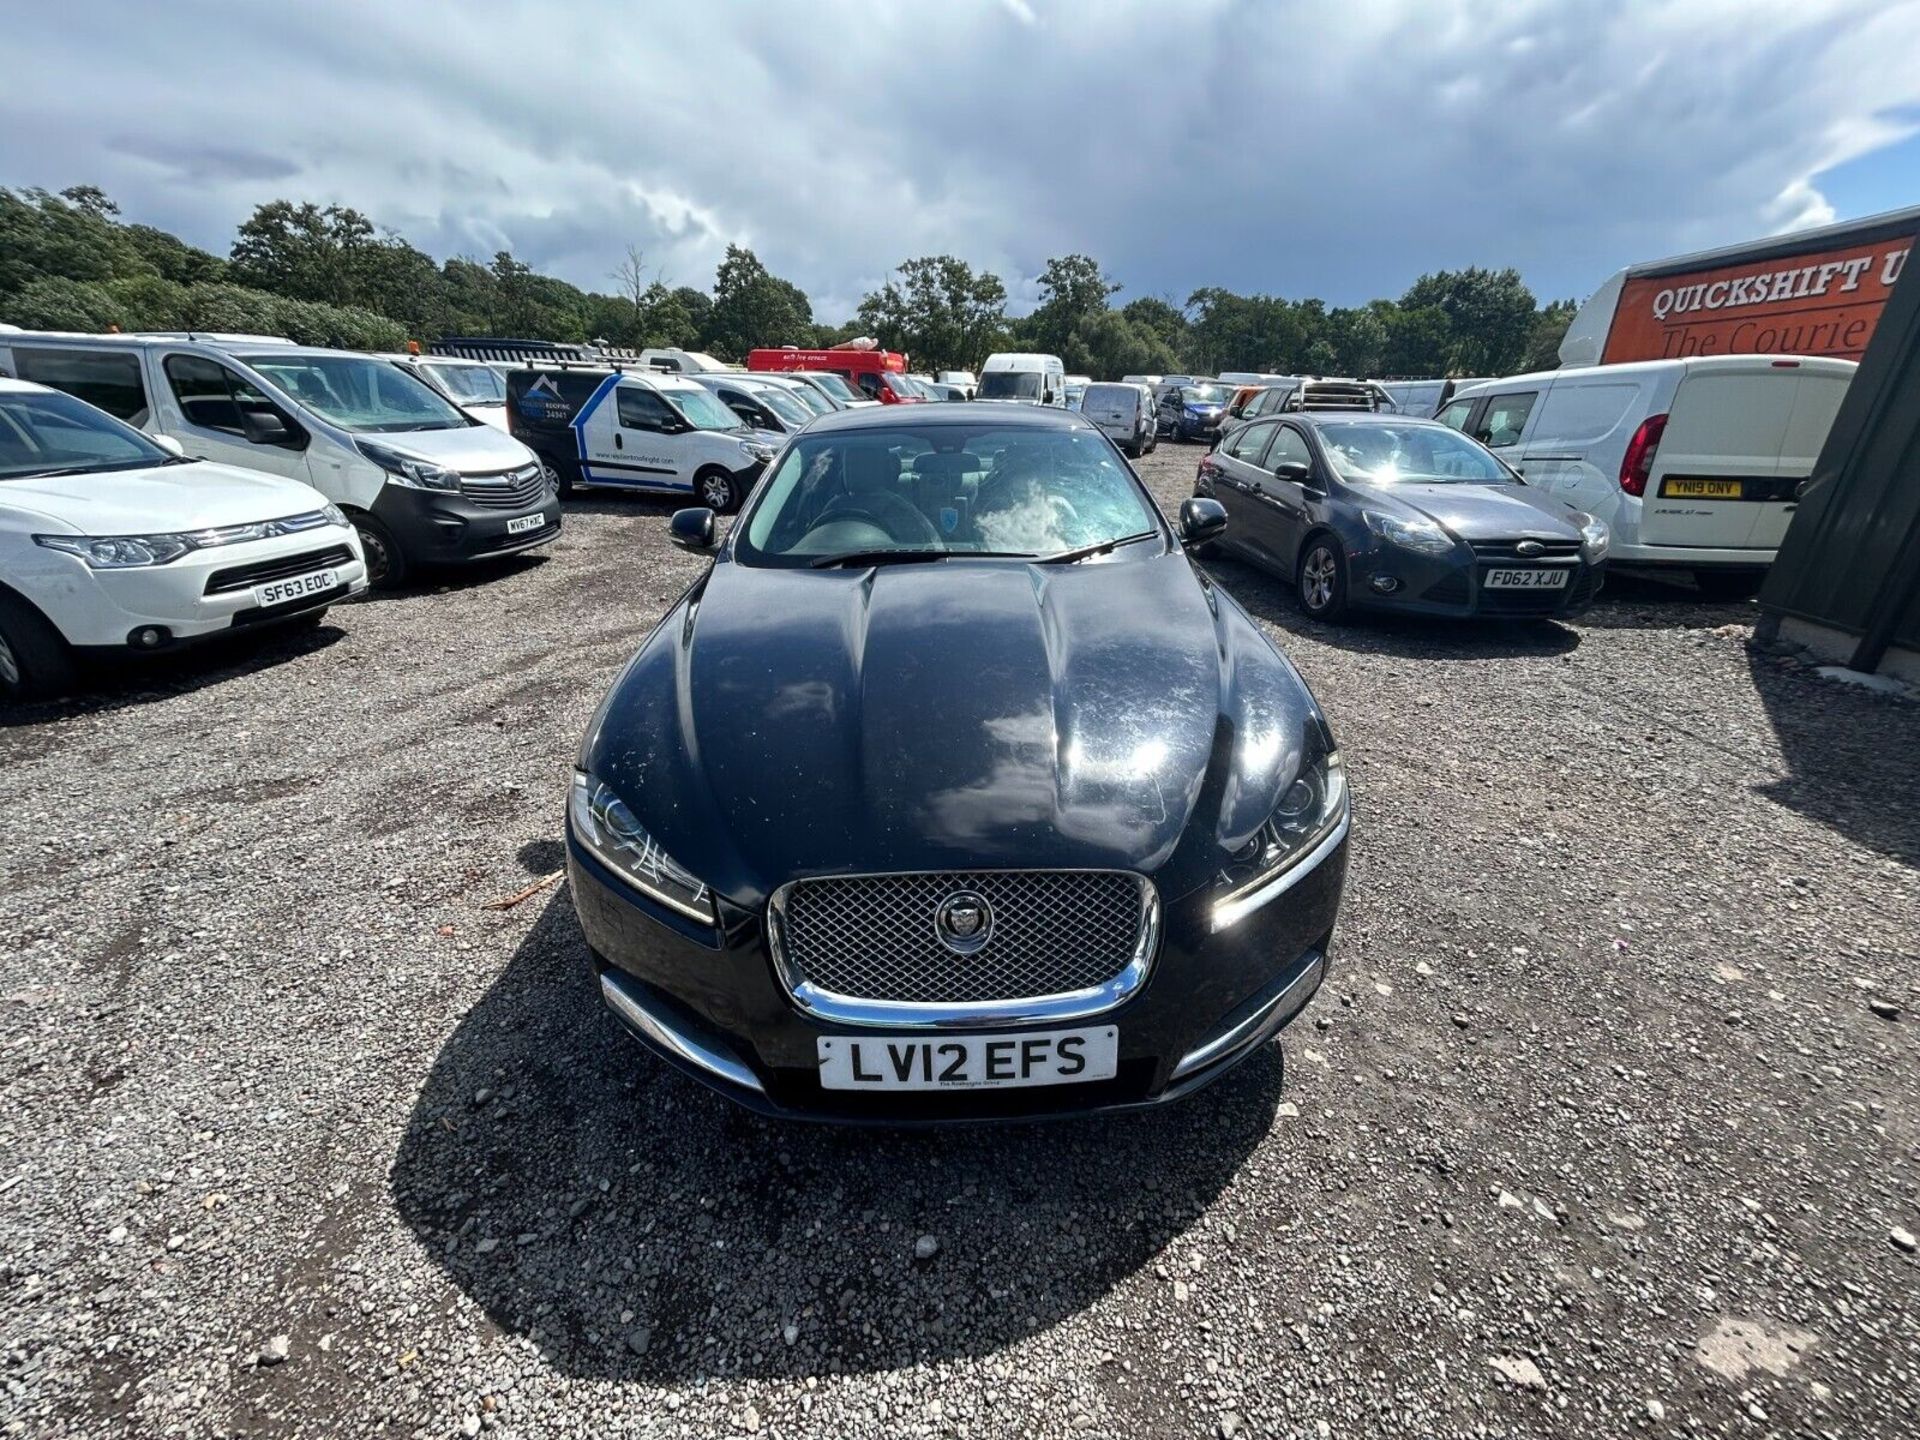 2012 JAGUAR XF LUXURY AUTOMATIC SWB SALOON 5 DOOR STARTS AND DRIVES - Image 3 of 15